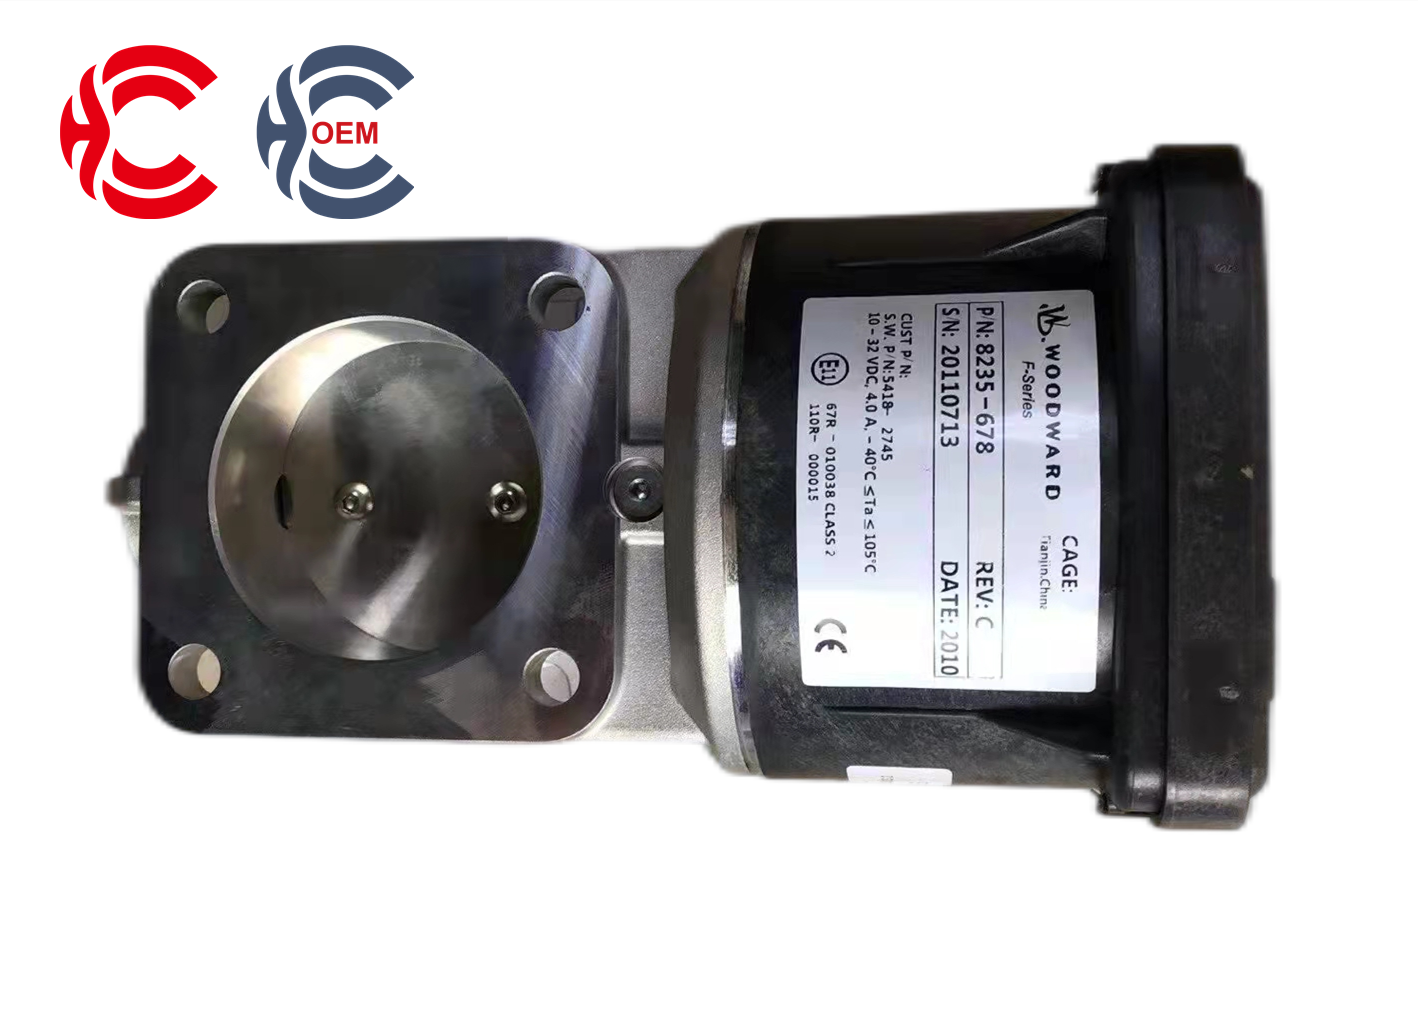 OEM: 612600190504 8235-678Material: ABS MetalColor: black silverOrigin: Made in ChinaWeight: 400gPacking List: 1* Electronic Throttle More ServiceWe can provide OEM Manufacturing serviceWe can Be your one-step solution for Auto PartsWe can provide technical scheme for you Feel Free to Contact Us, We will get back to you as soon as possible.